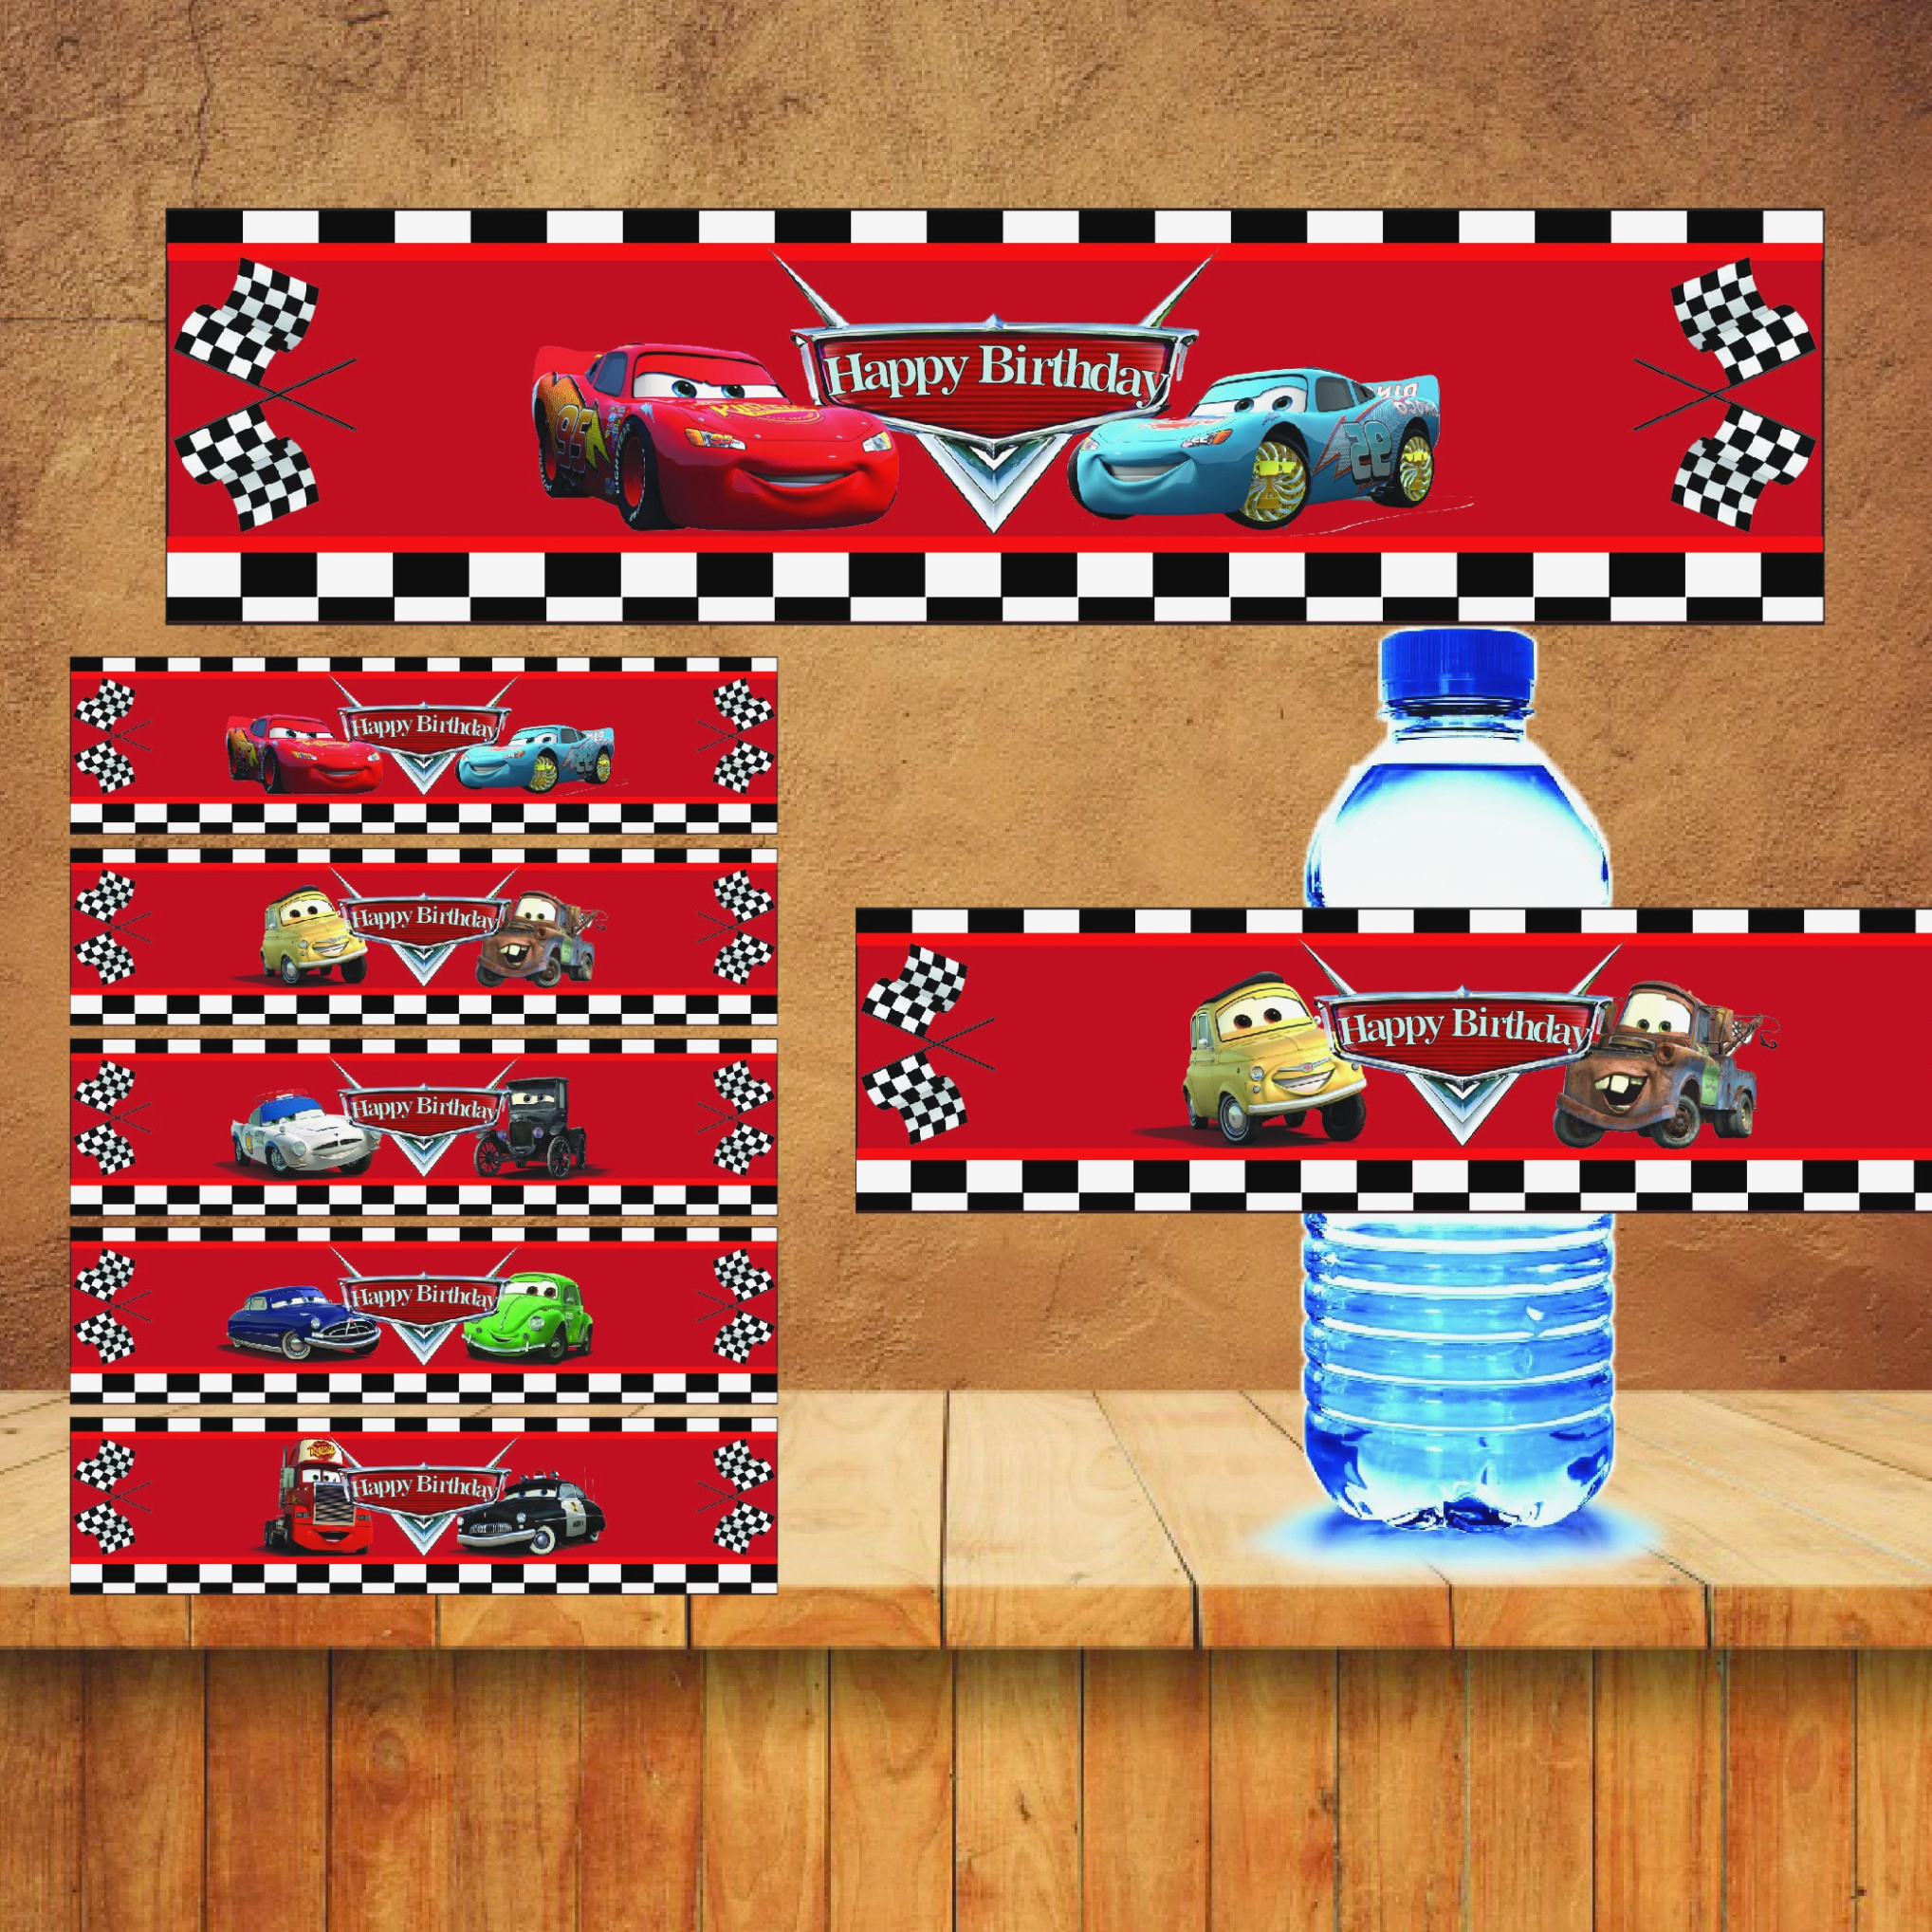 Learn All About Cars Water | Label Maker Ideas Information - Free Printable Disney Cars Water Bottle Labels